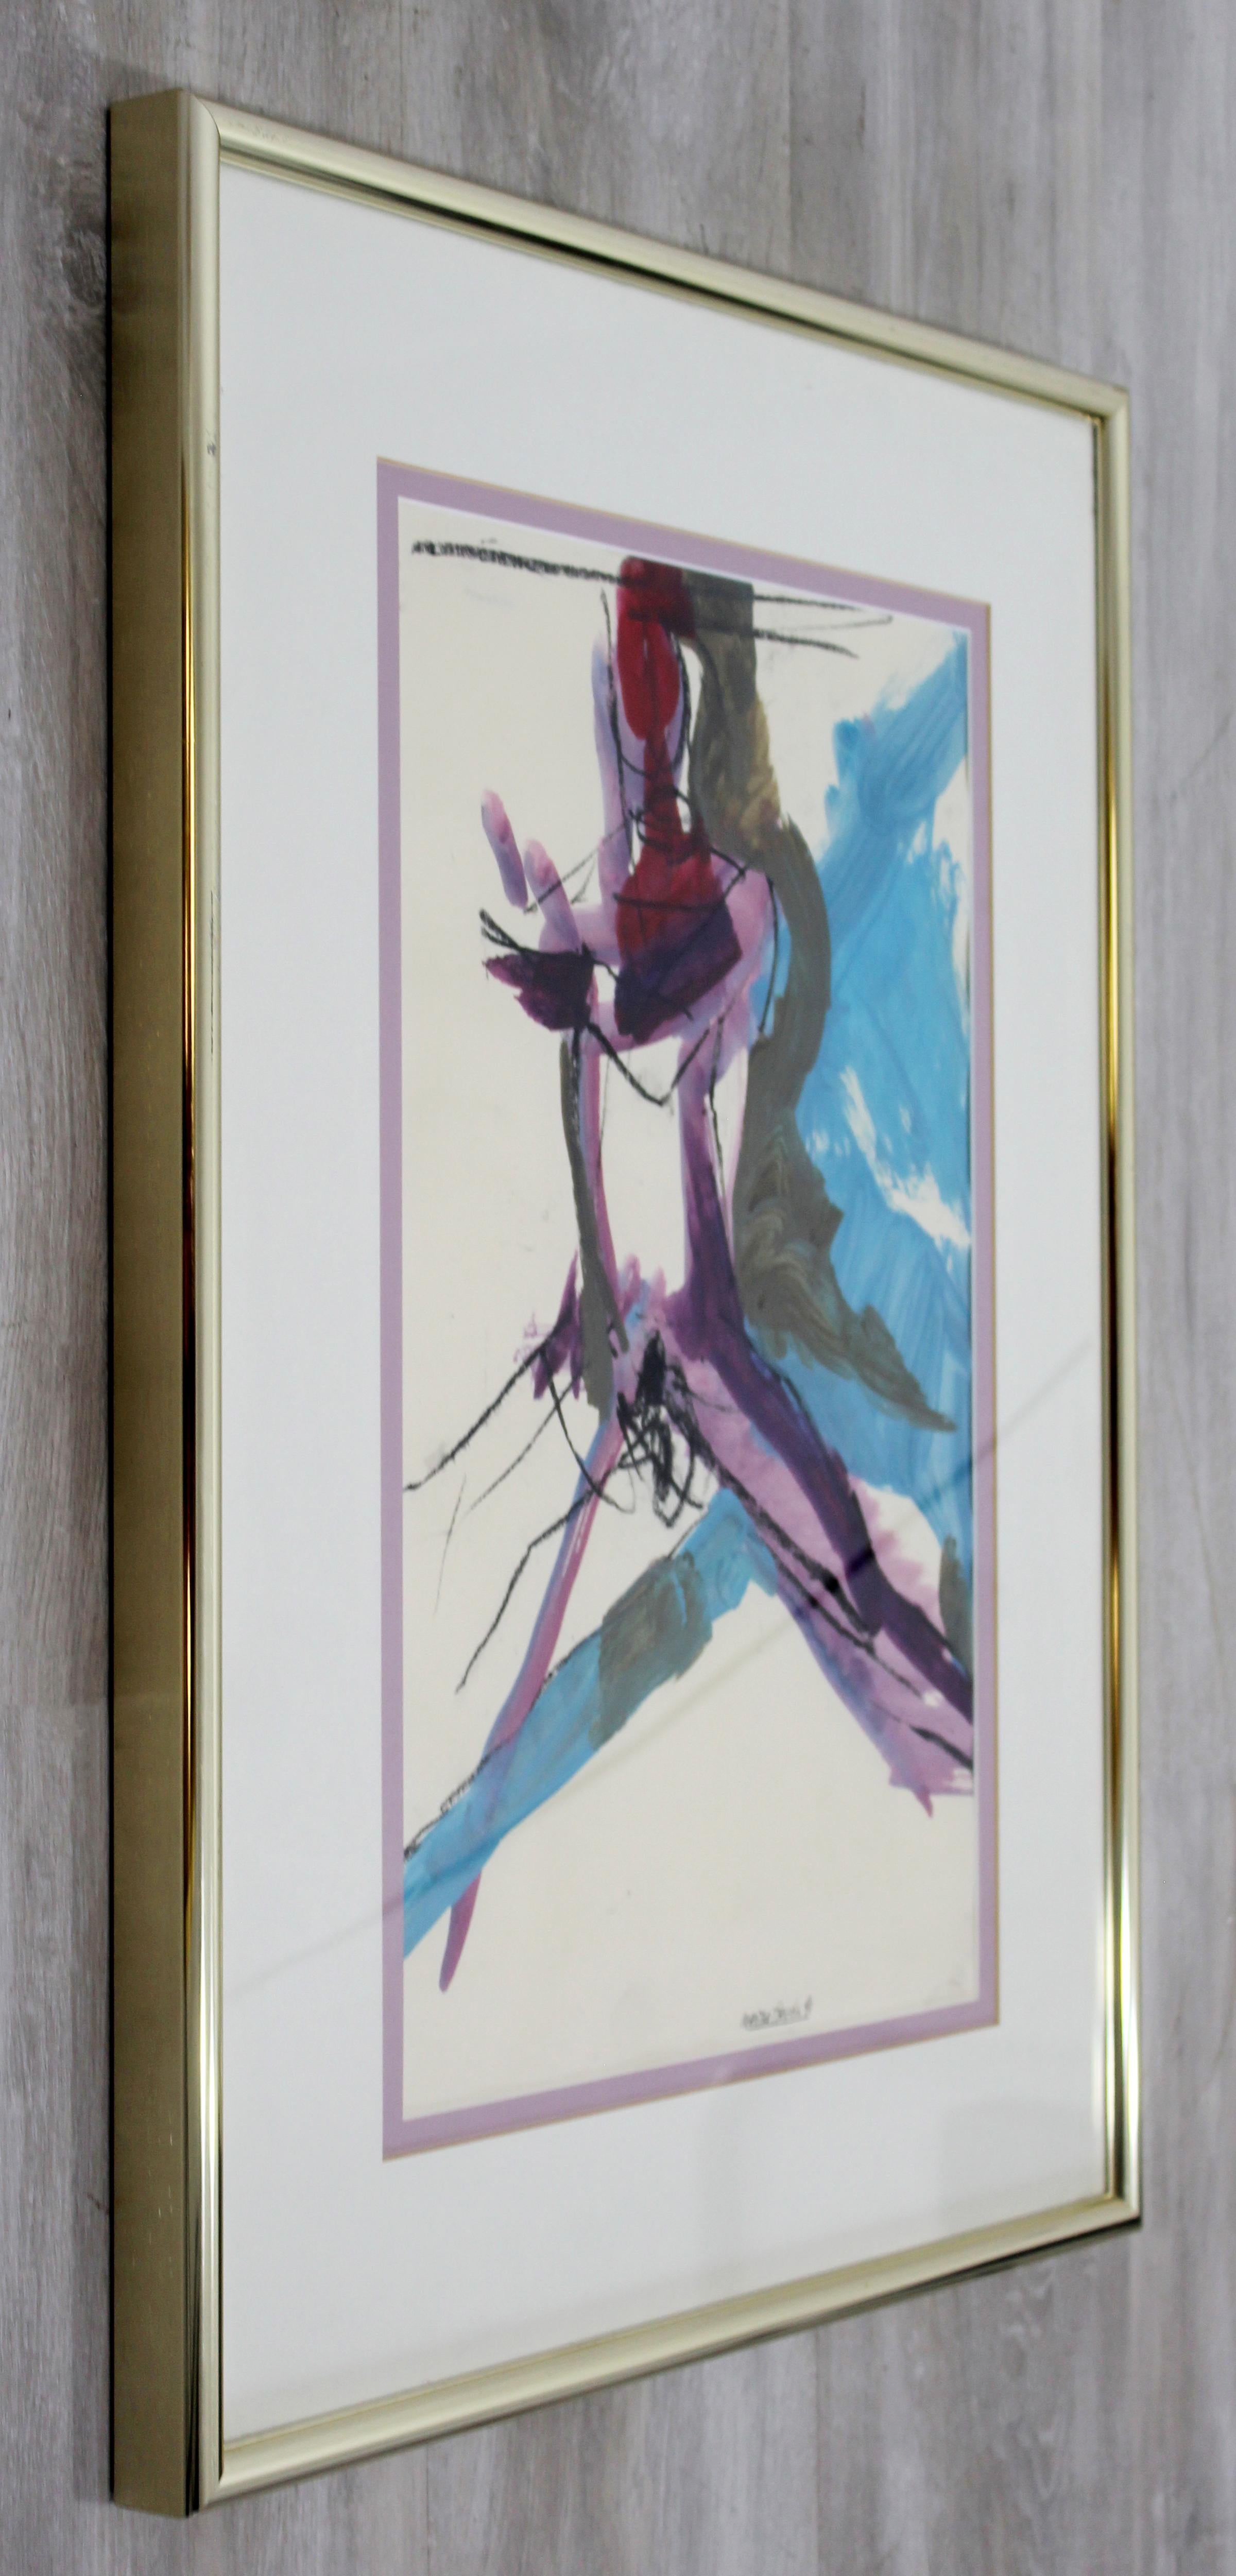 Late 20th Century Contemporary Framed Chalk Acrylic Painting Signed Martha Nessler Hayden, 1990s